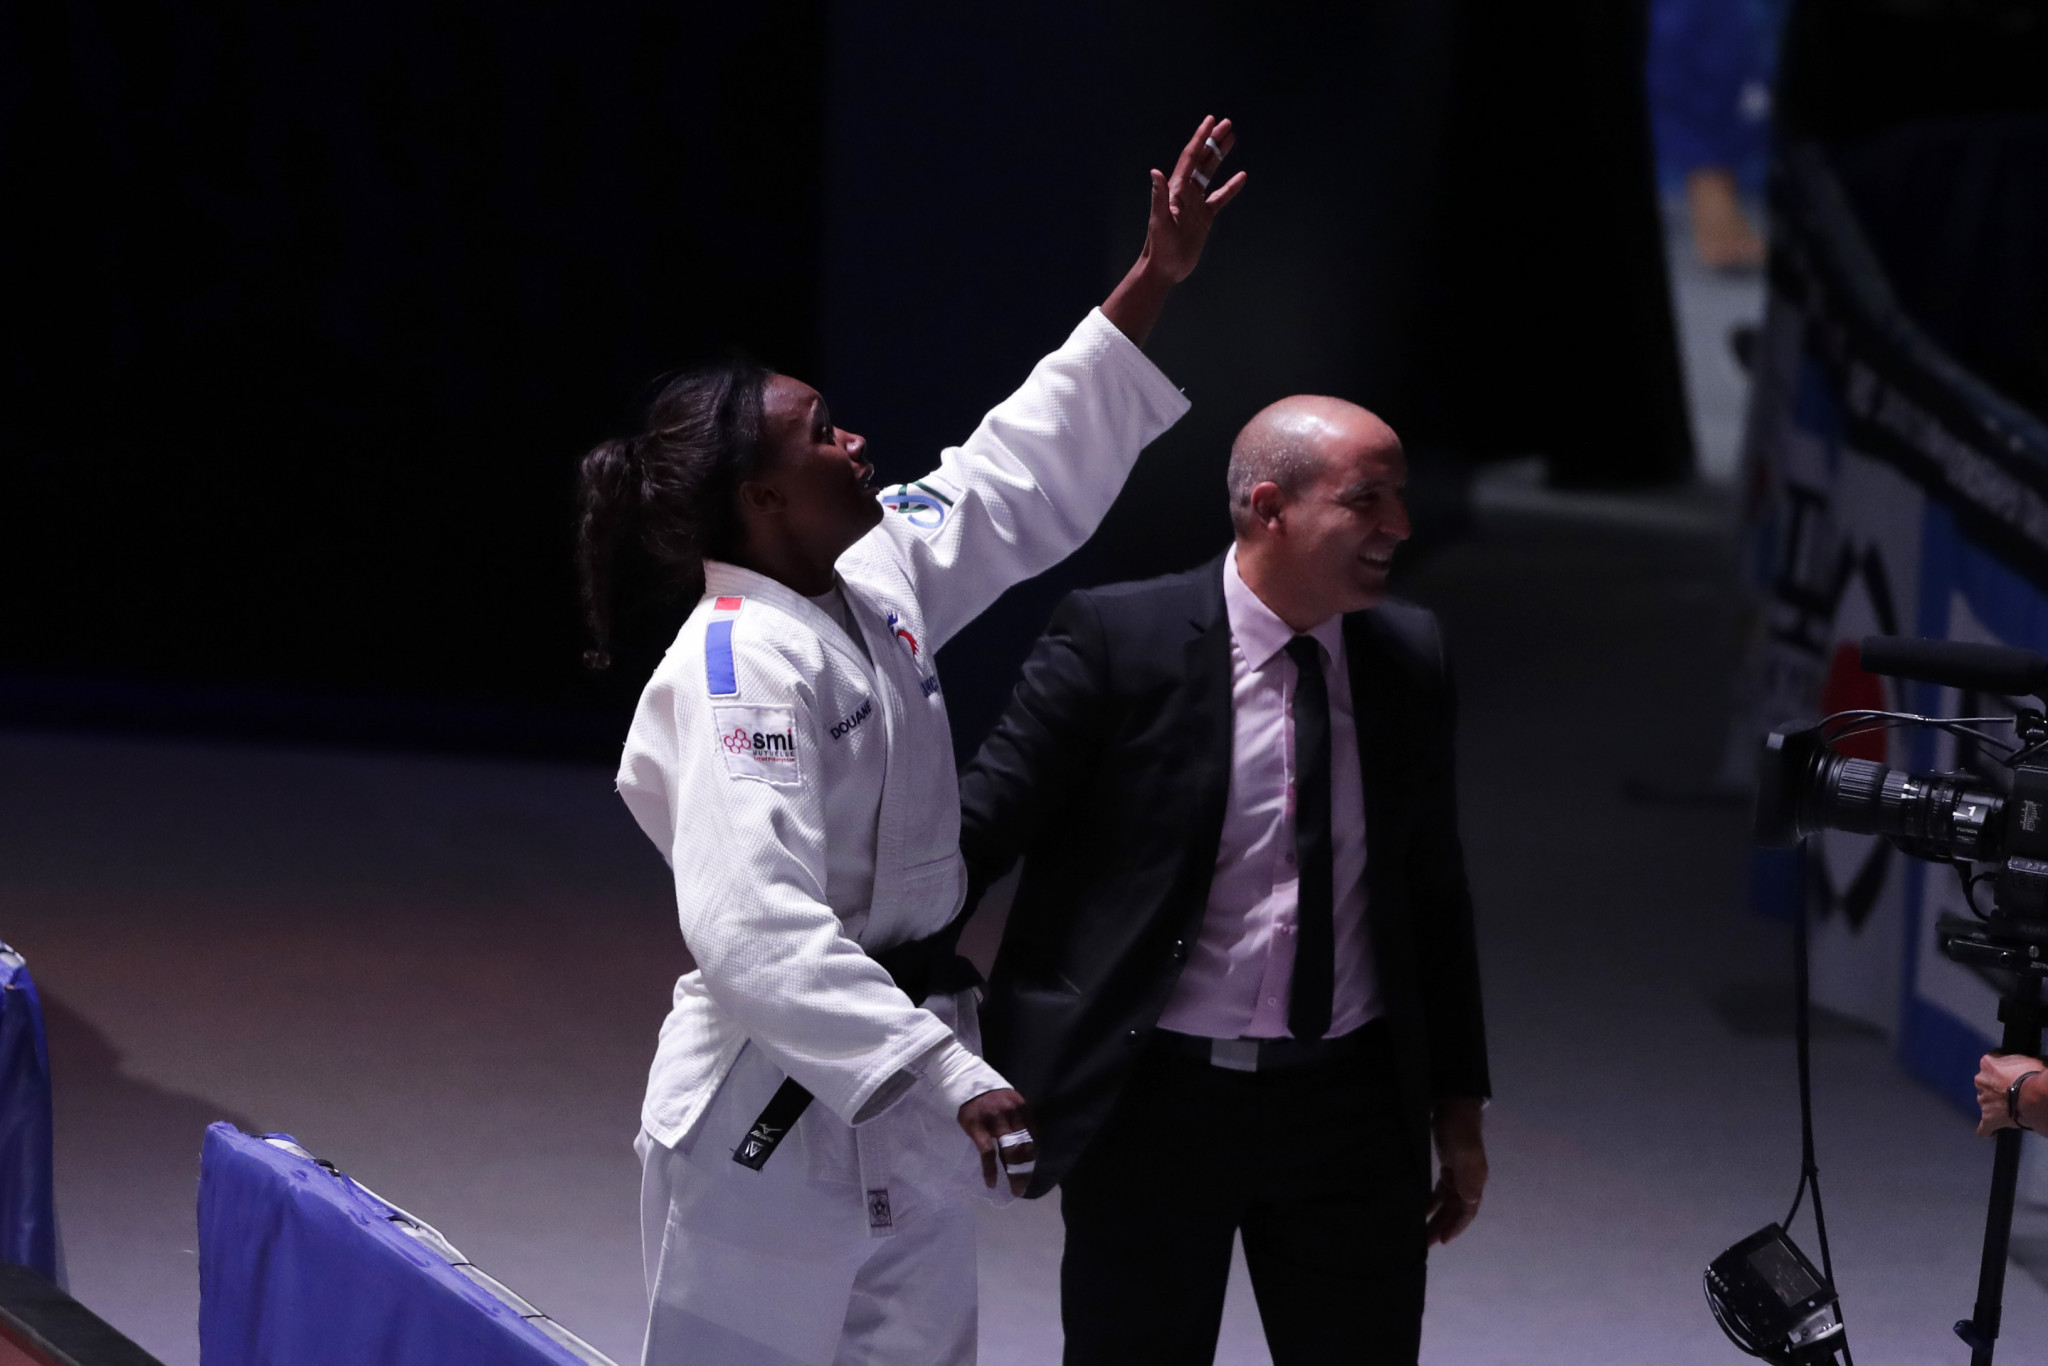 Malonga waves to the crowd after sealing France's third gold of these Championships ©Getty Images